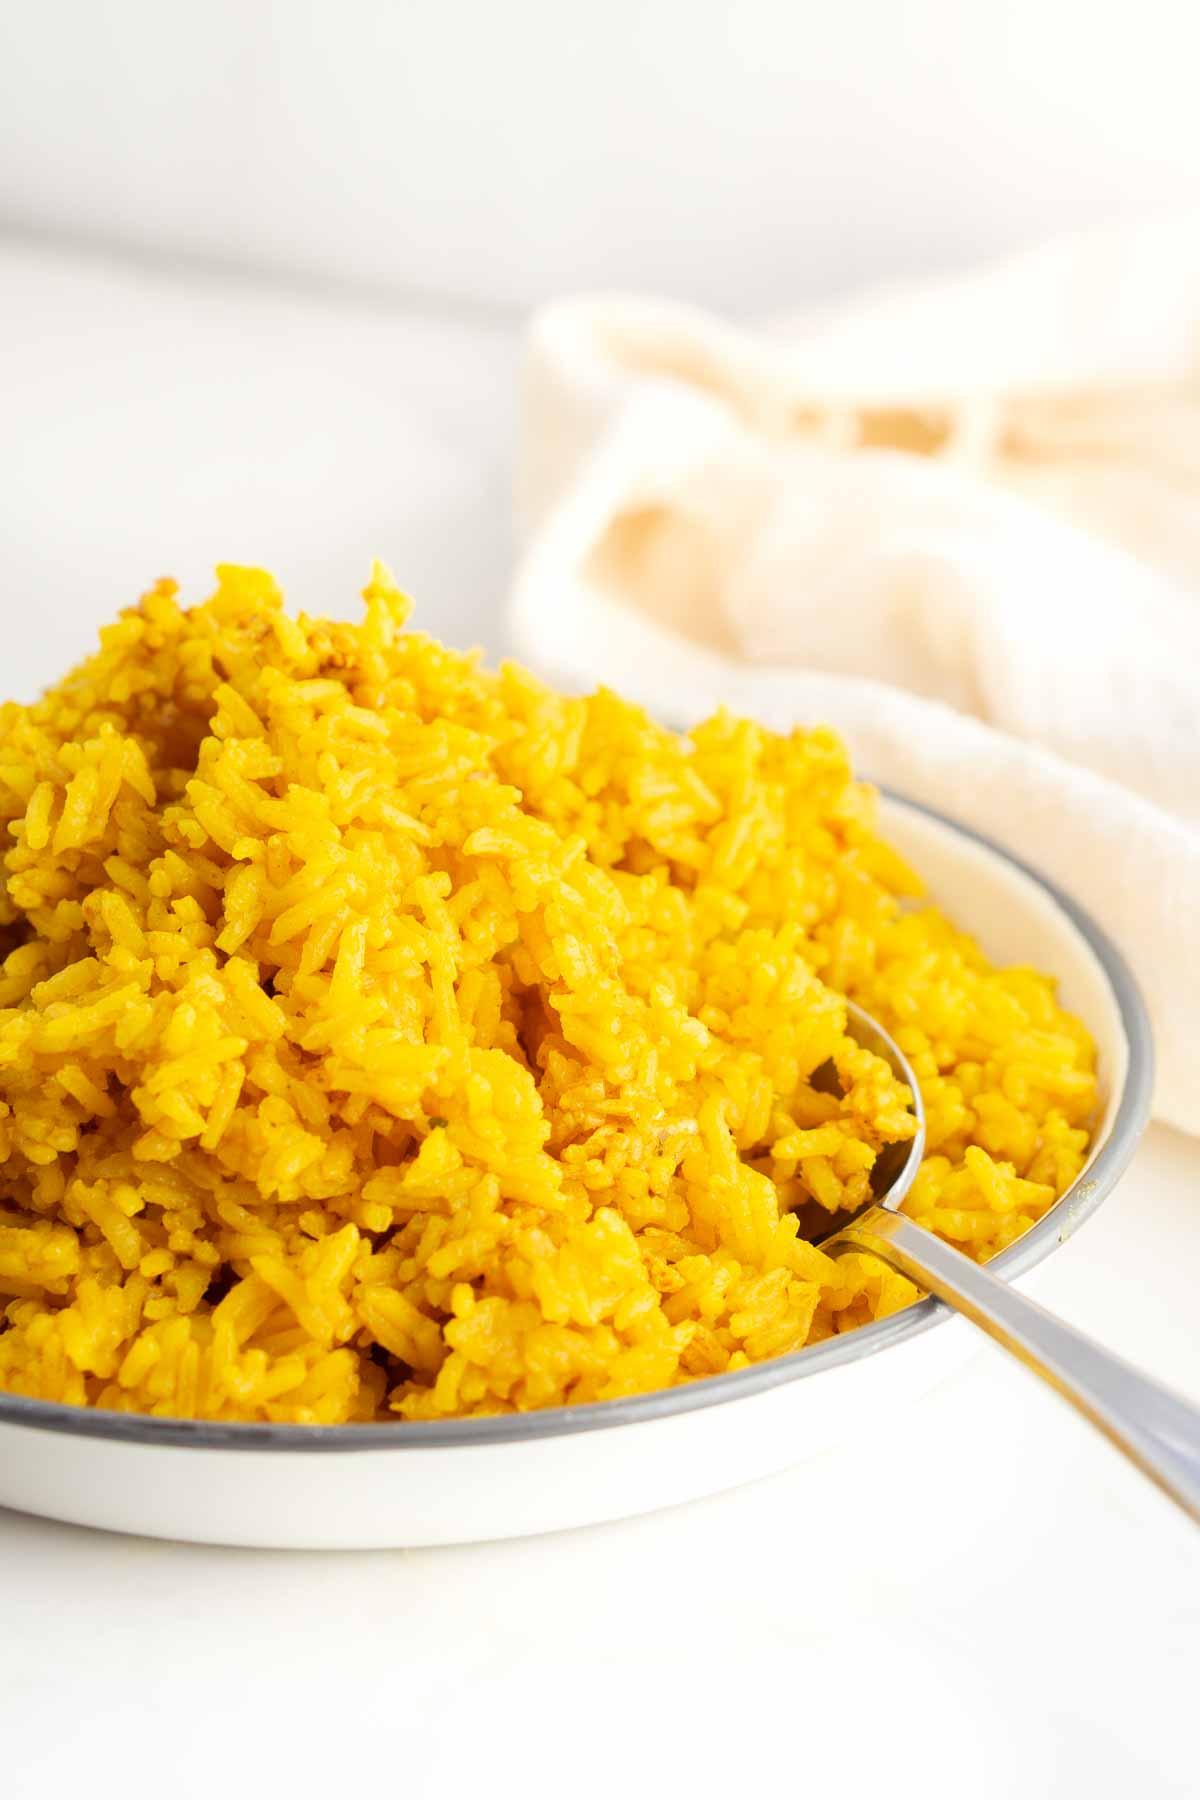 Plate of turmeric rice with spoon for serving